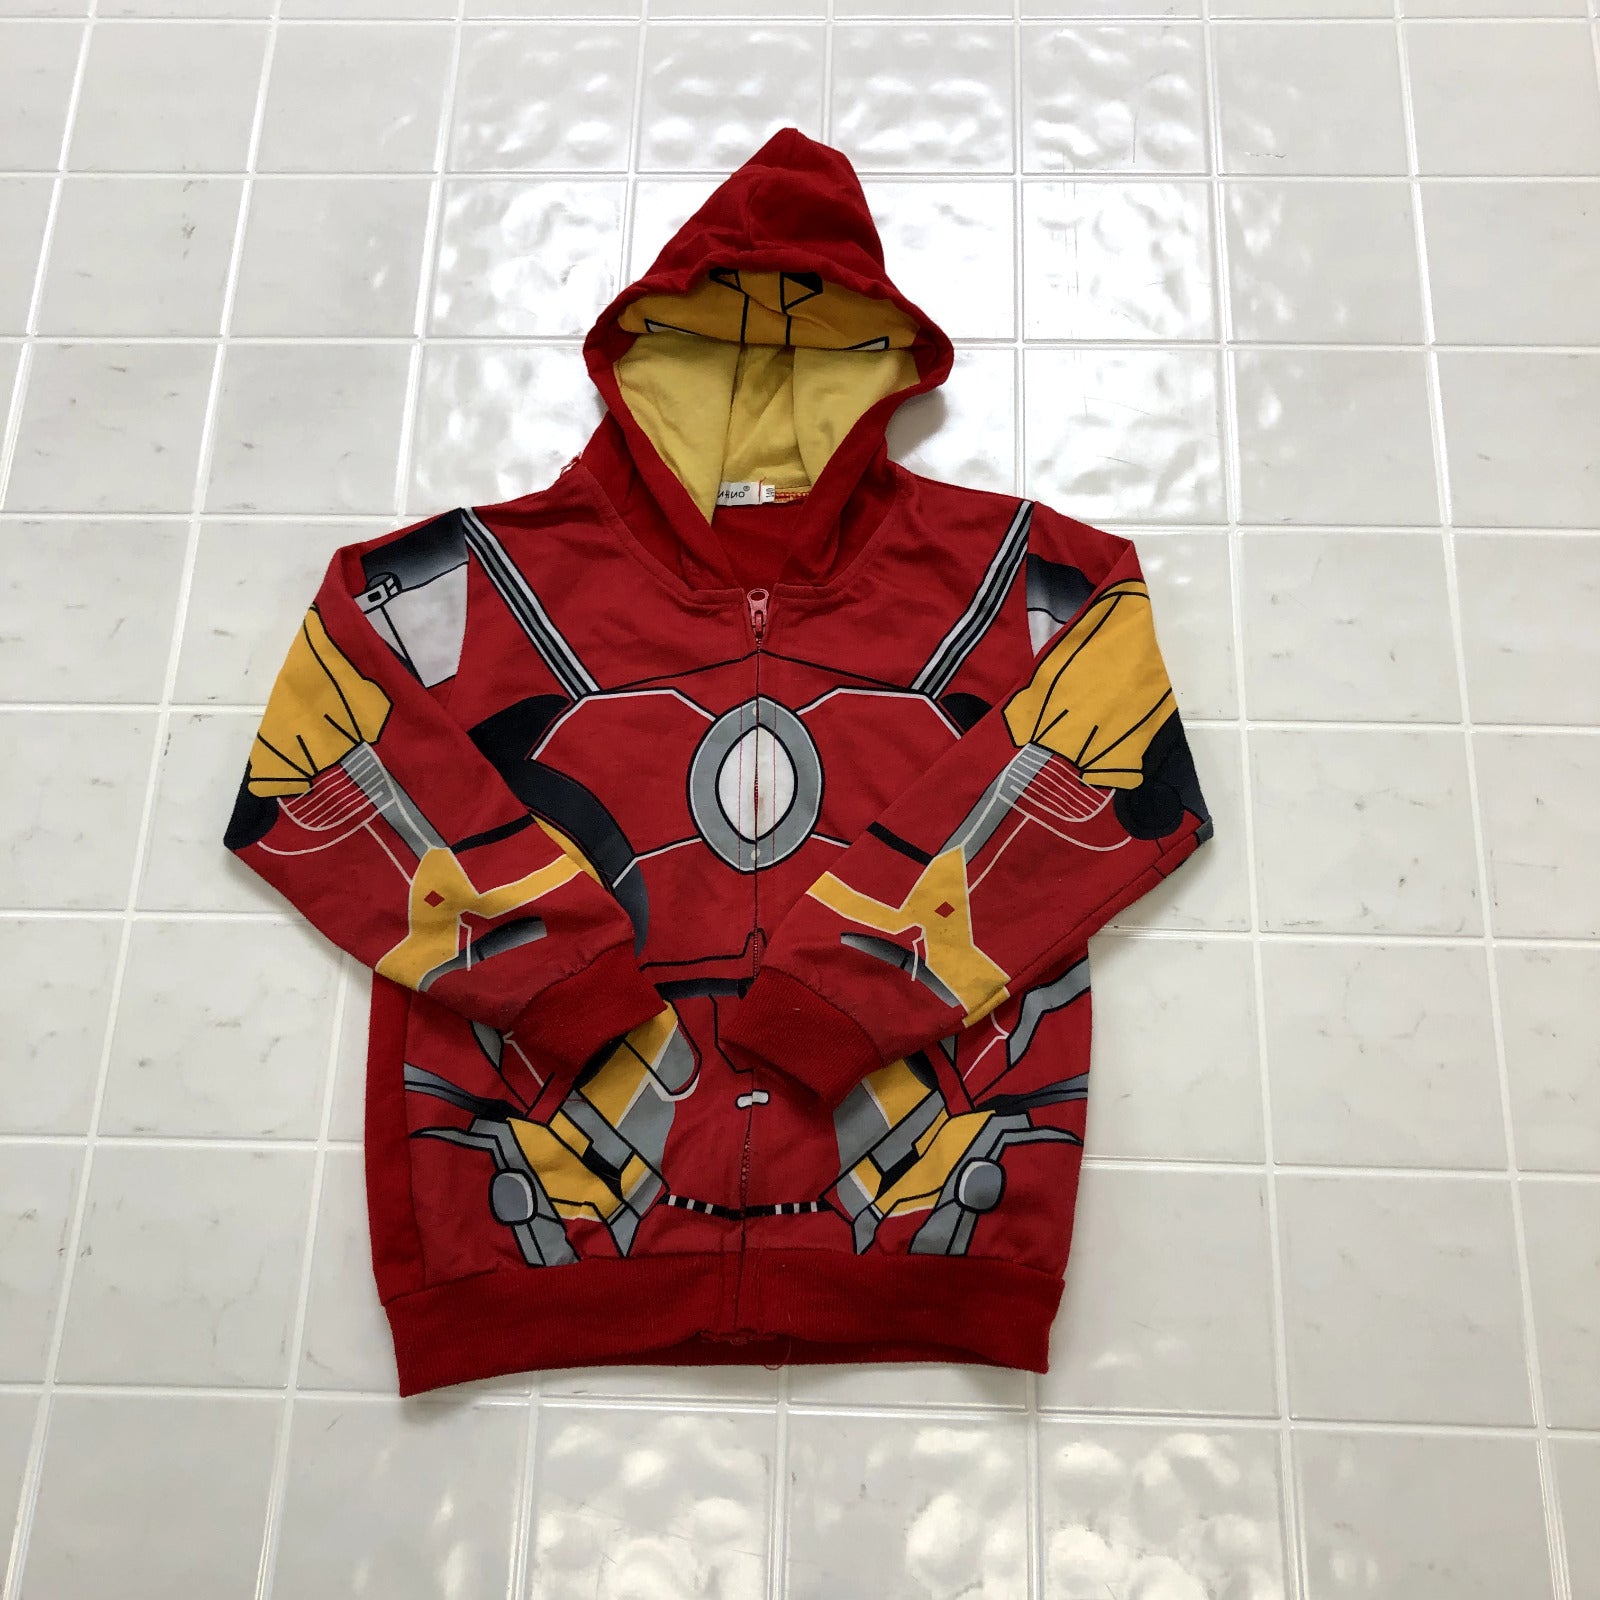 Keaiyouhuo Red Multicolor Graphic Regular Fit Stretch Jacket Youth Size M